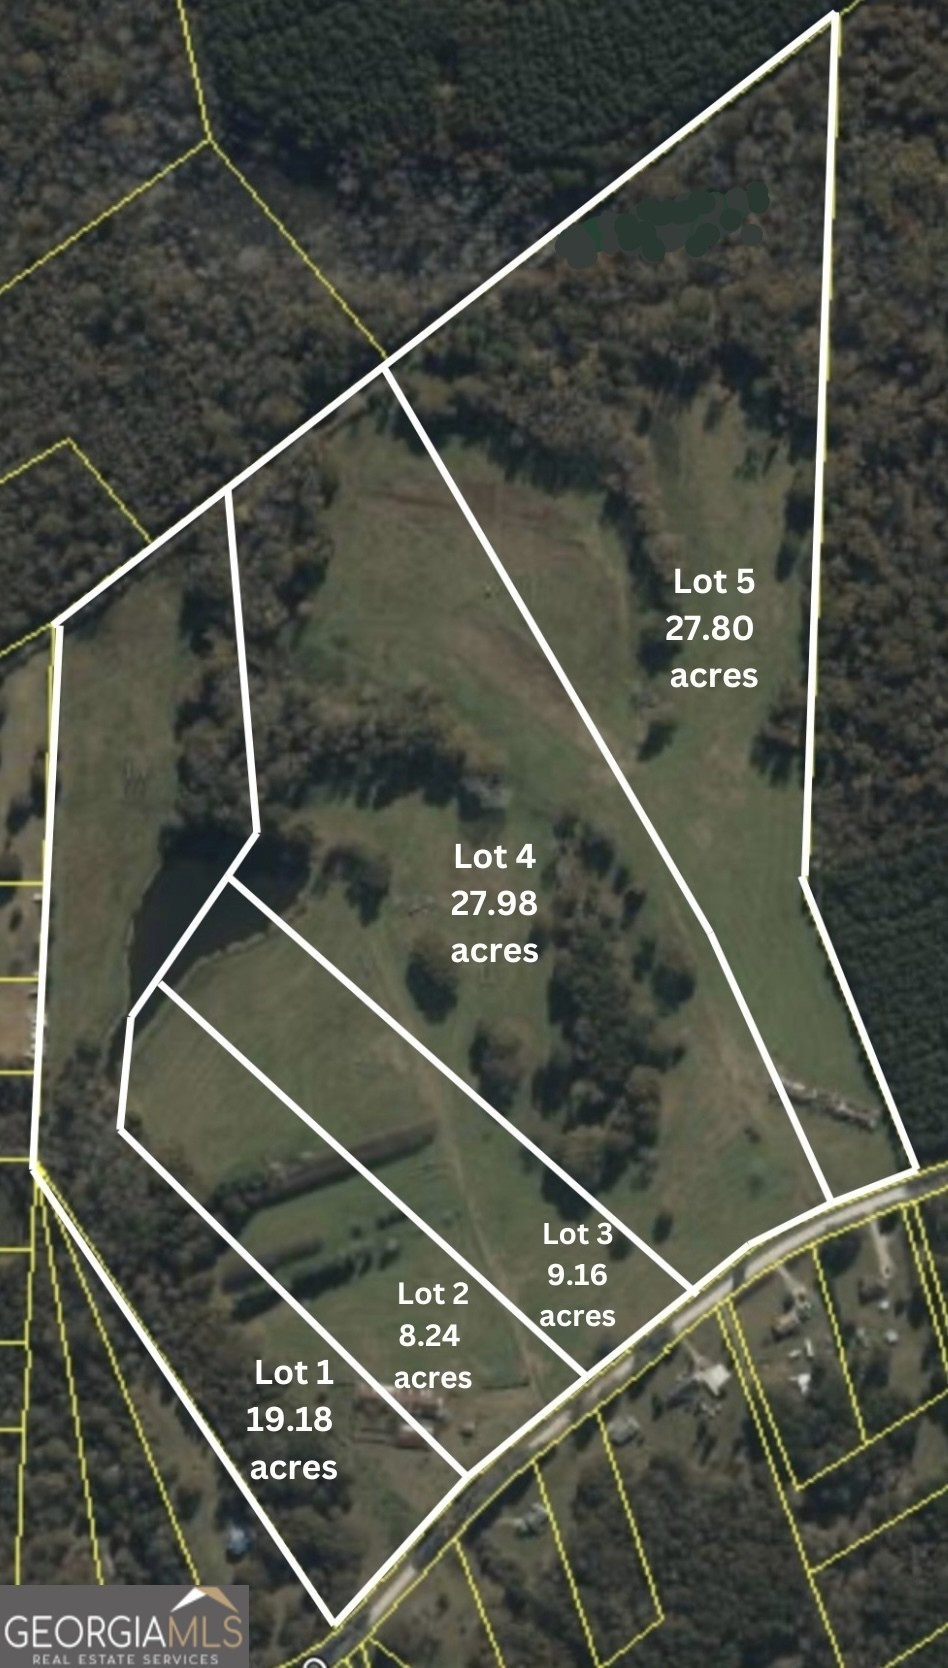 4. 0 Old Zebulon Road - Tract 3